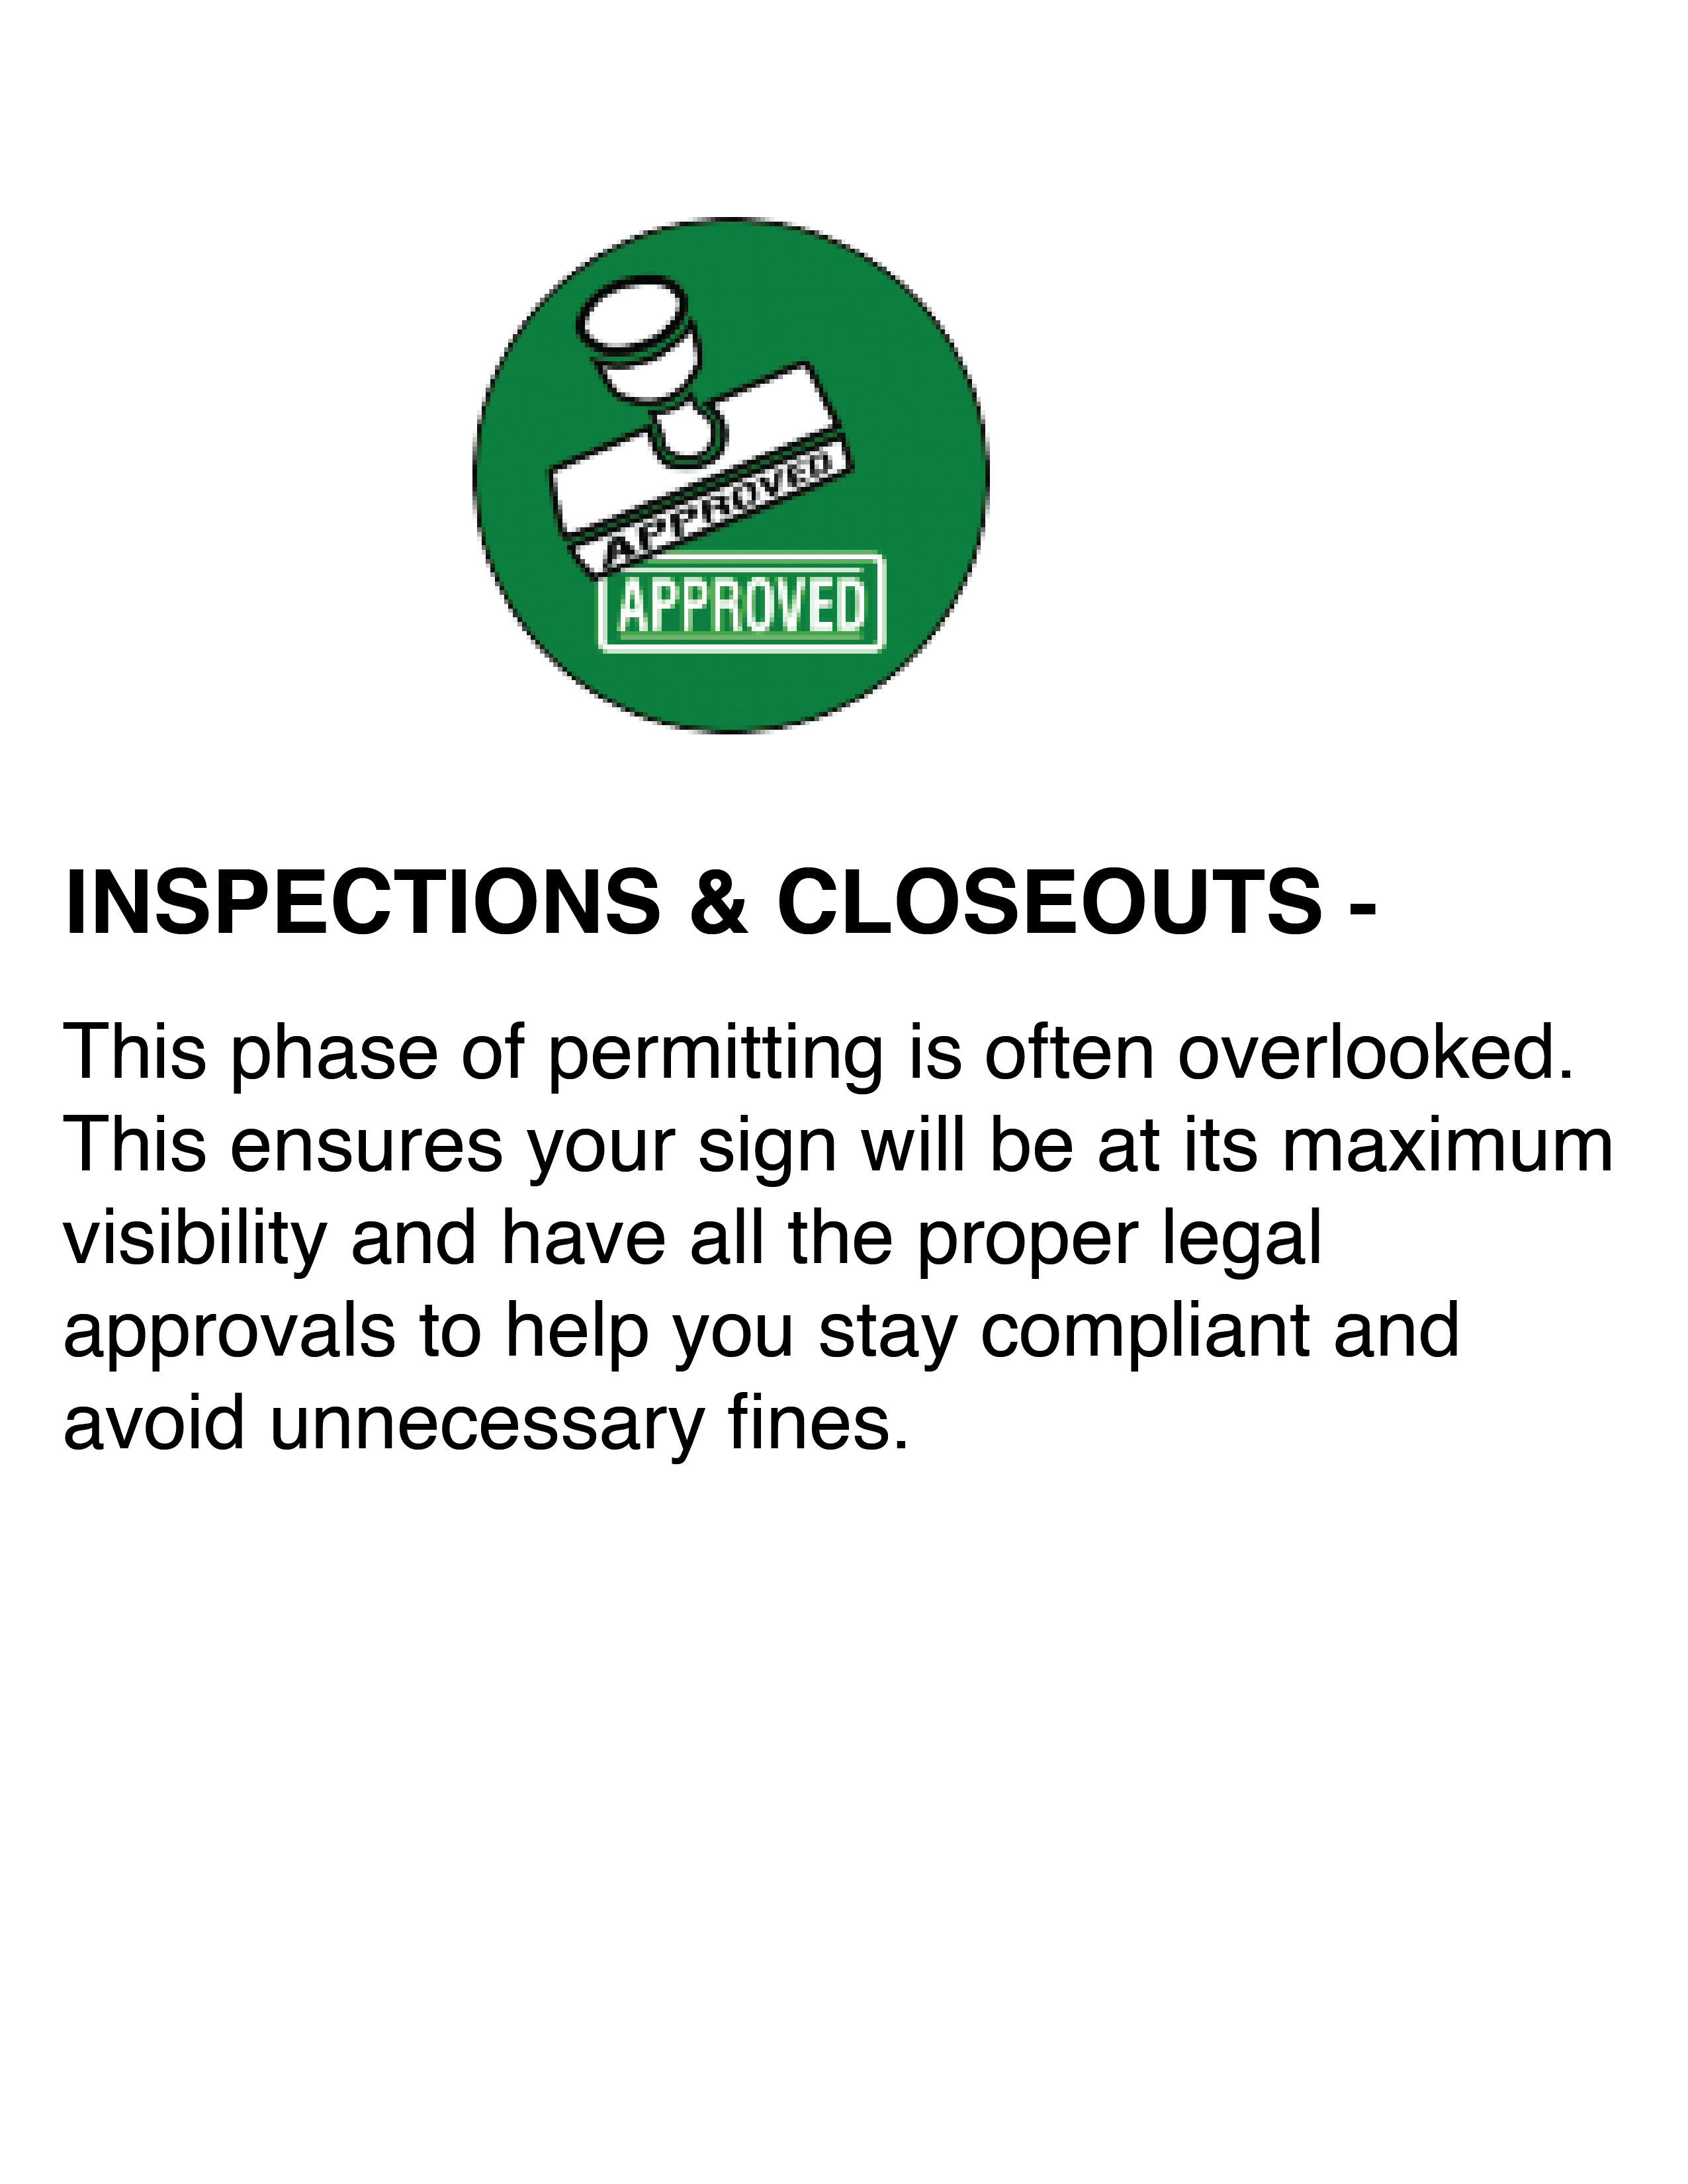 Inspections & Closeouts Blurbs